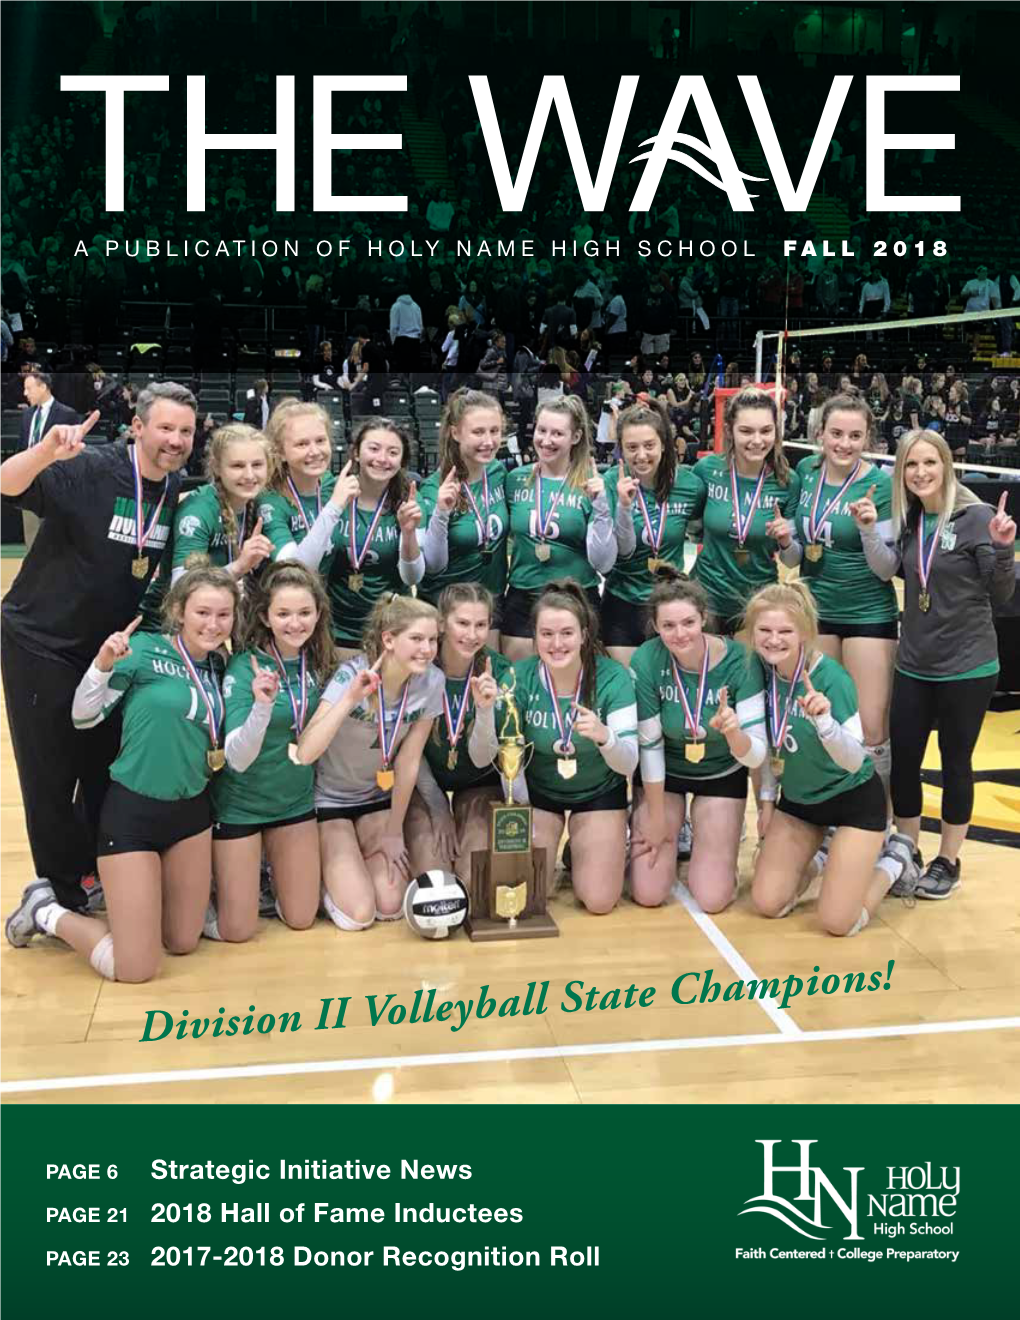 Division II Volleyball State Champions!